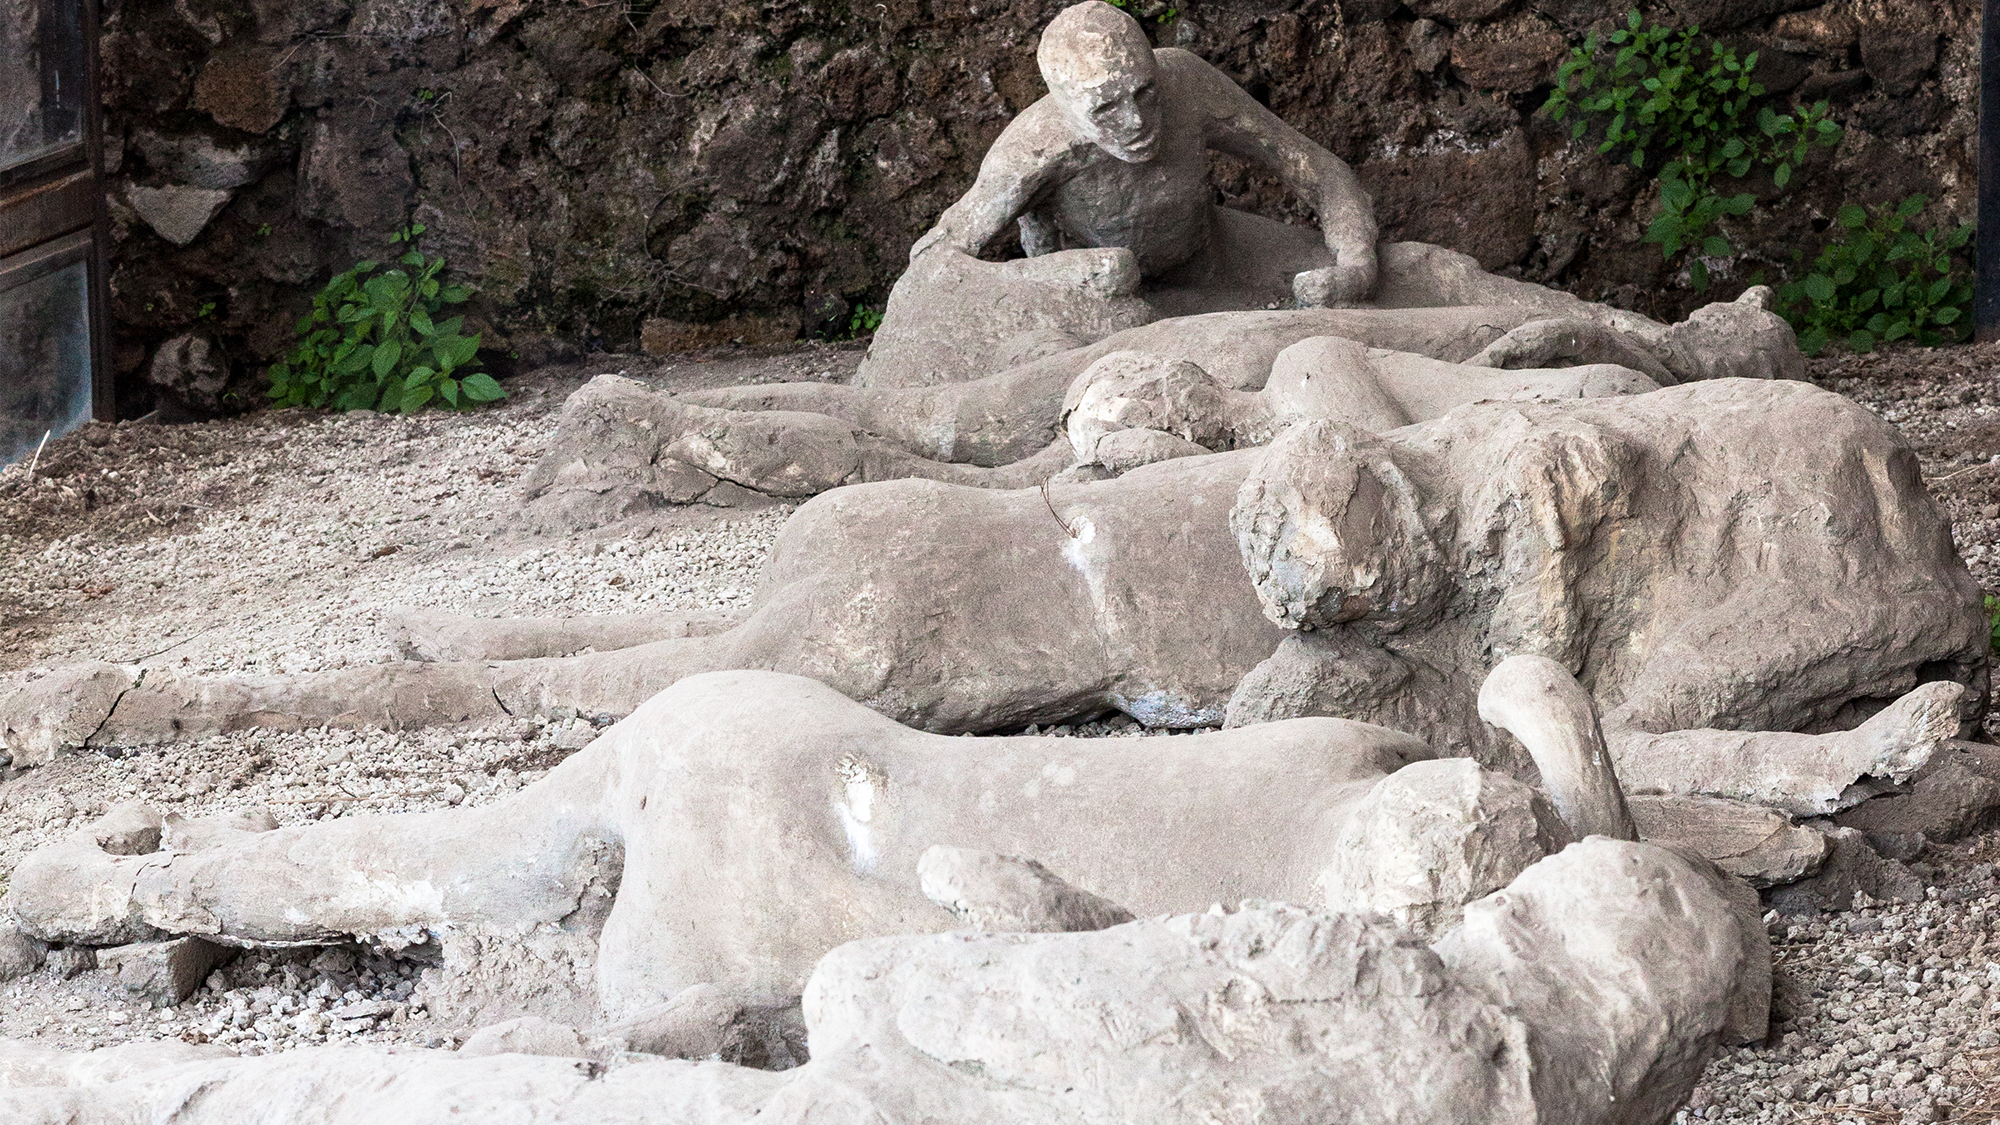 Pompeii’s archaeological puzzles can be solved with a little help from chemistry